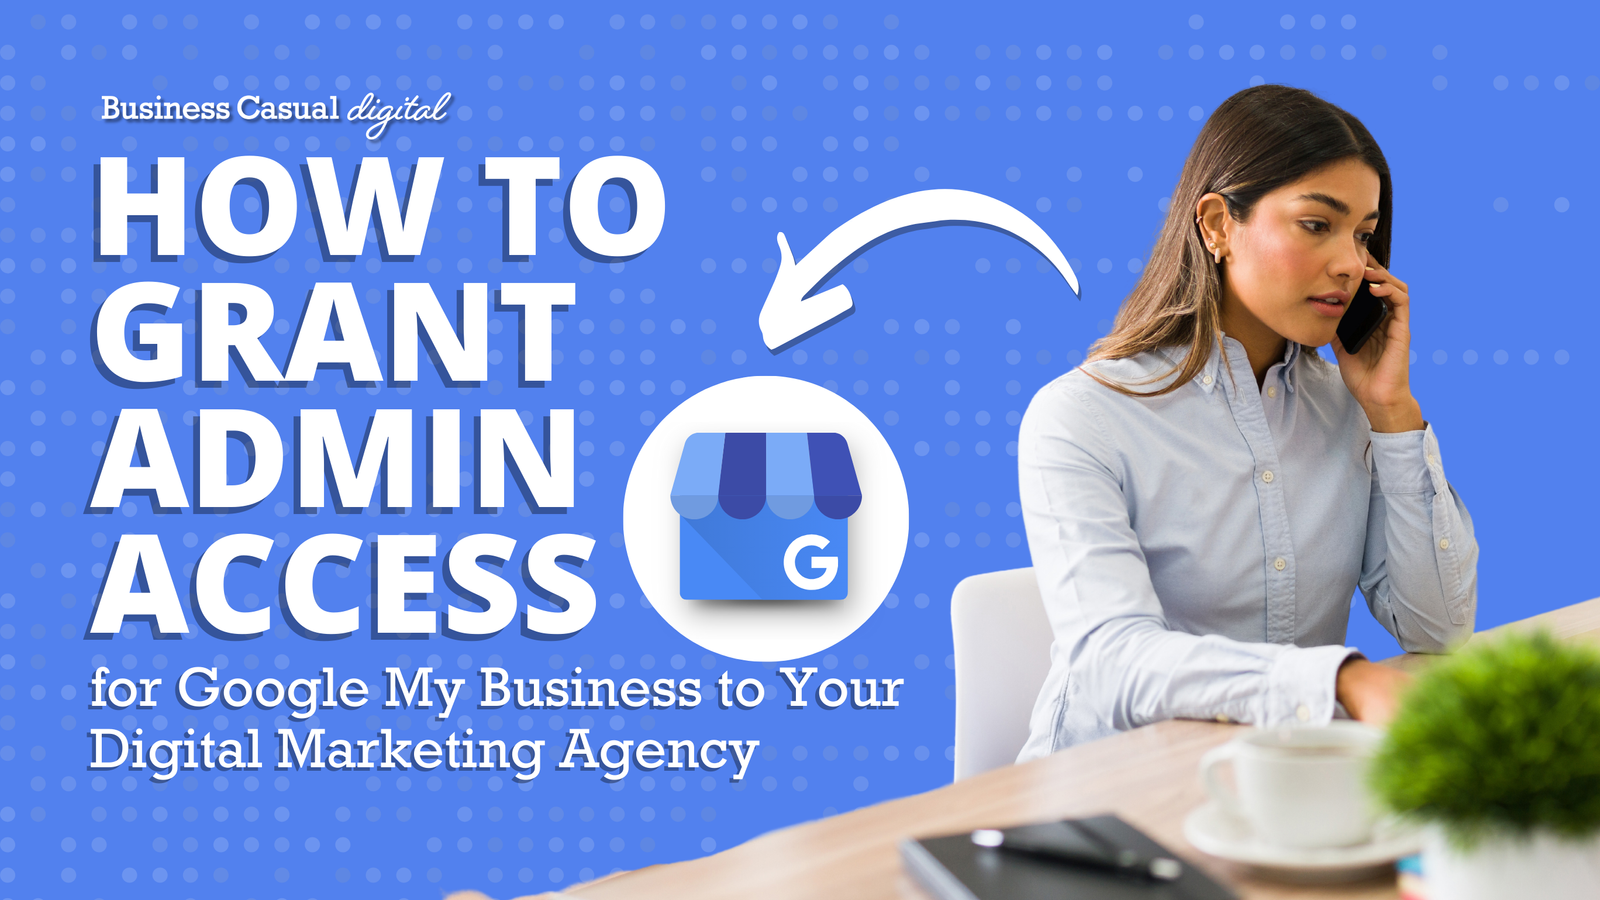 How to Grant Admin Access for Google My Business to Your Digital Marketing Agency